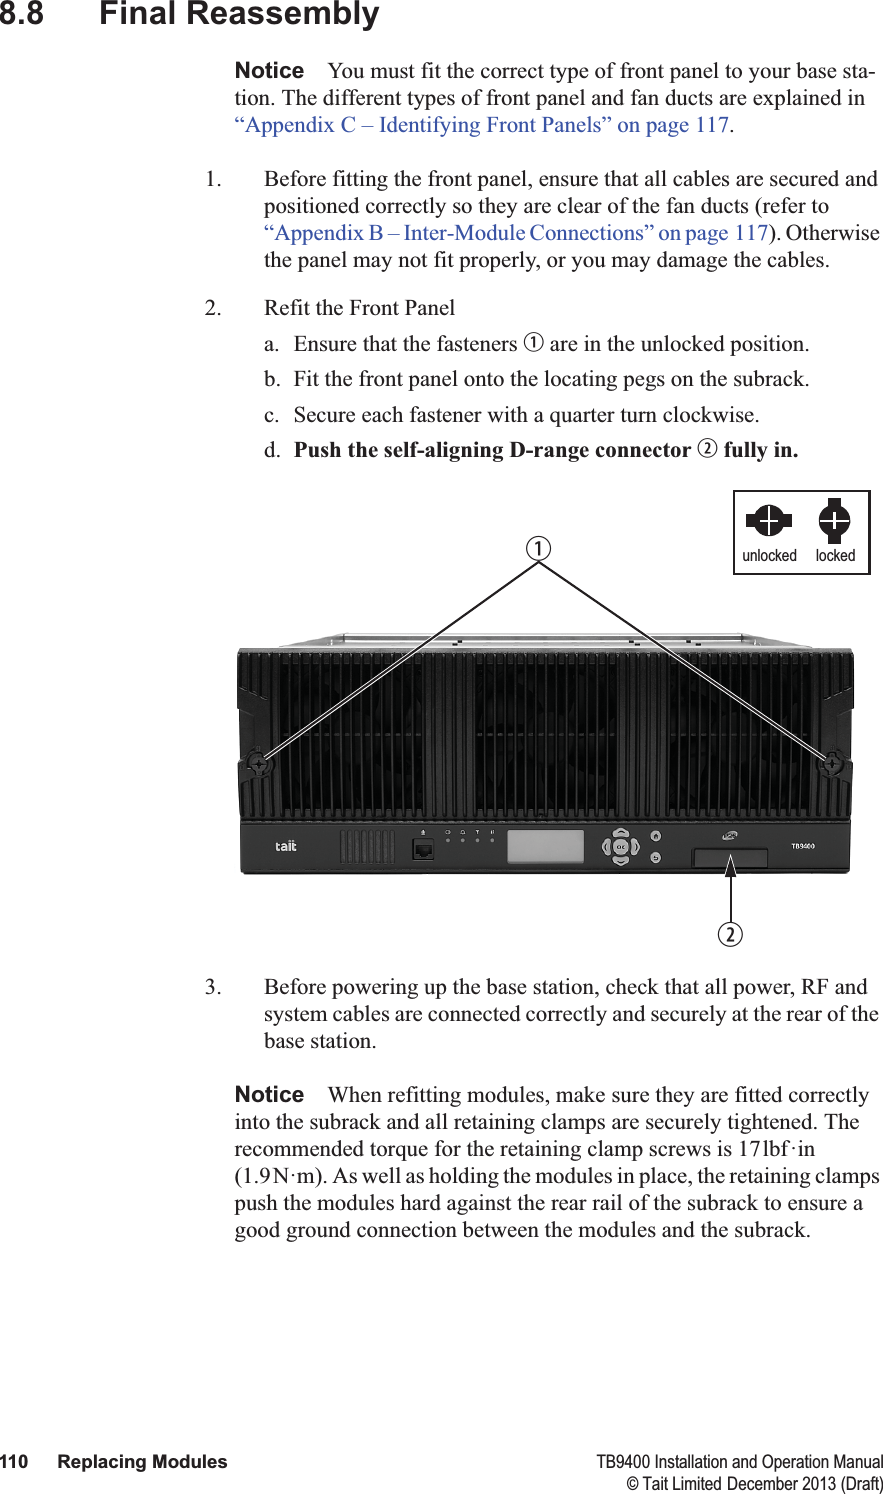  110 Replacing Modules TB9400 Installation and Operation Manual© Tait Limited December 2013 (Draft)8.8 Final ReassemblyNotice You must fit the correct type of front panel to your base sta-tion. The different types of front panel and fan ducts are explained in “Appendix C – Identifying Front Panels” on page 117.1. Before fitting the front panel, ensure that all cables are secured and positioned correctly so they are clear of the fan ducts (refer to “Appendix B – Inter-Module Connections” on page 117). Otherwise the panel may not fit properly, or you may damage the cables.2. Refit the Front Panela. Ensure that the fasteners b are in the unlocked position.b. Fit the front panel onto the locating pegs on the subrack. c. Secure each fastener with a quarter turn clockwise.d. Push the self-aligning D-range connector c fully in.3. Before powering up the base station, check that all power, RF and system cables are connected correctly and securely at the rear of the base station.Notice When refitting modules, make sure they are fitted correctly into the subrack and all retaining clamps are securely tightened. The recommended torque for the retaining clamp screws is 17lbf·in (1.9N·m). As well as holding the modules in place, the retaining clamps push the modules hard against the rear rail of the subrack to ensure a good ground connection between the modules and the subrack.lockedunlockedbc